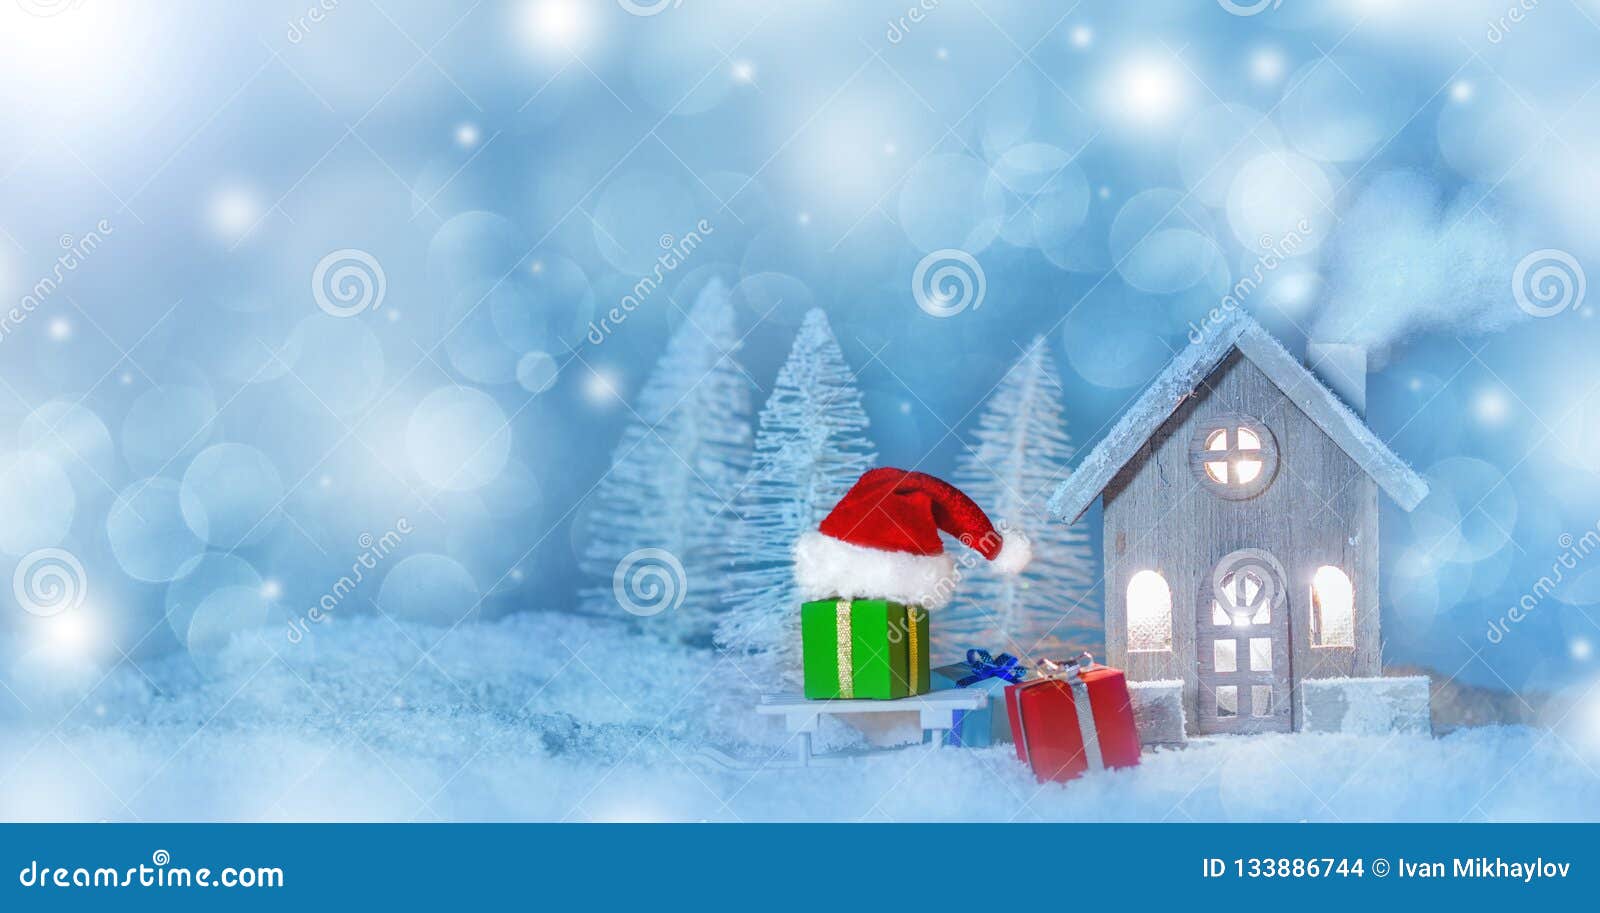 Christmas Card with House in Snow Stock Photo - Image of claus, house ...